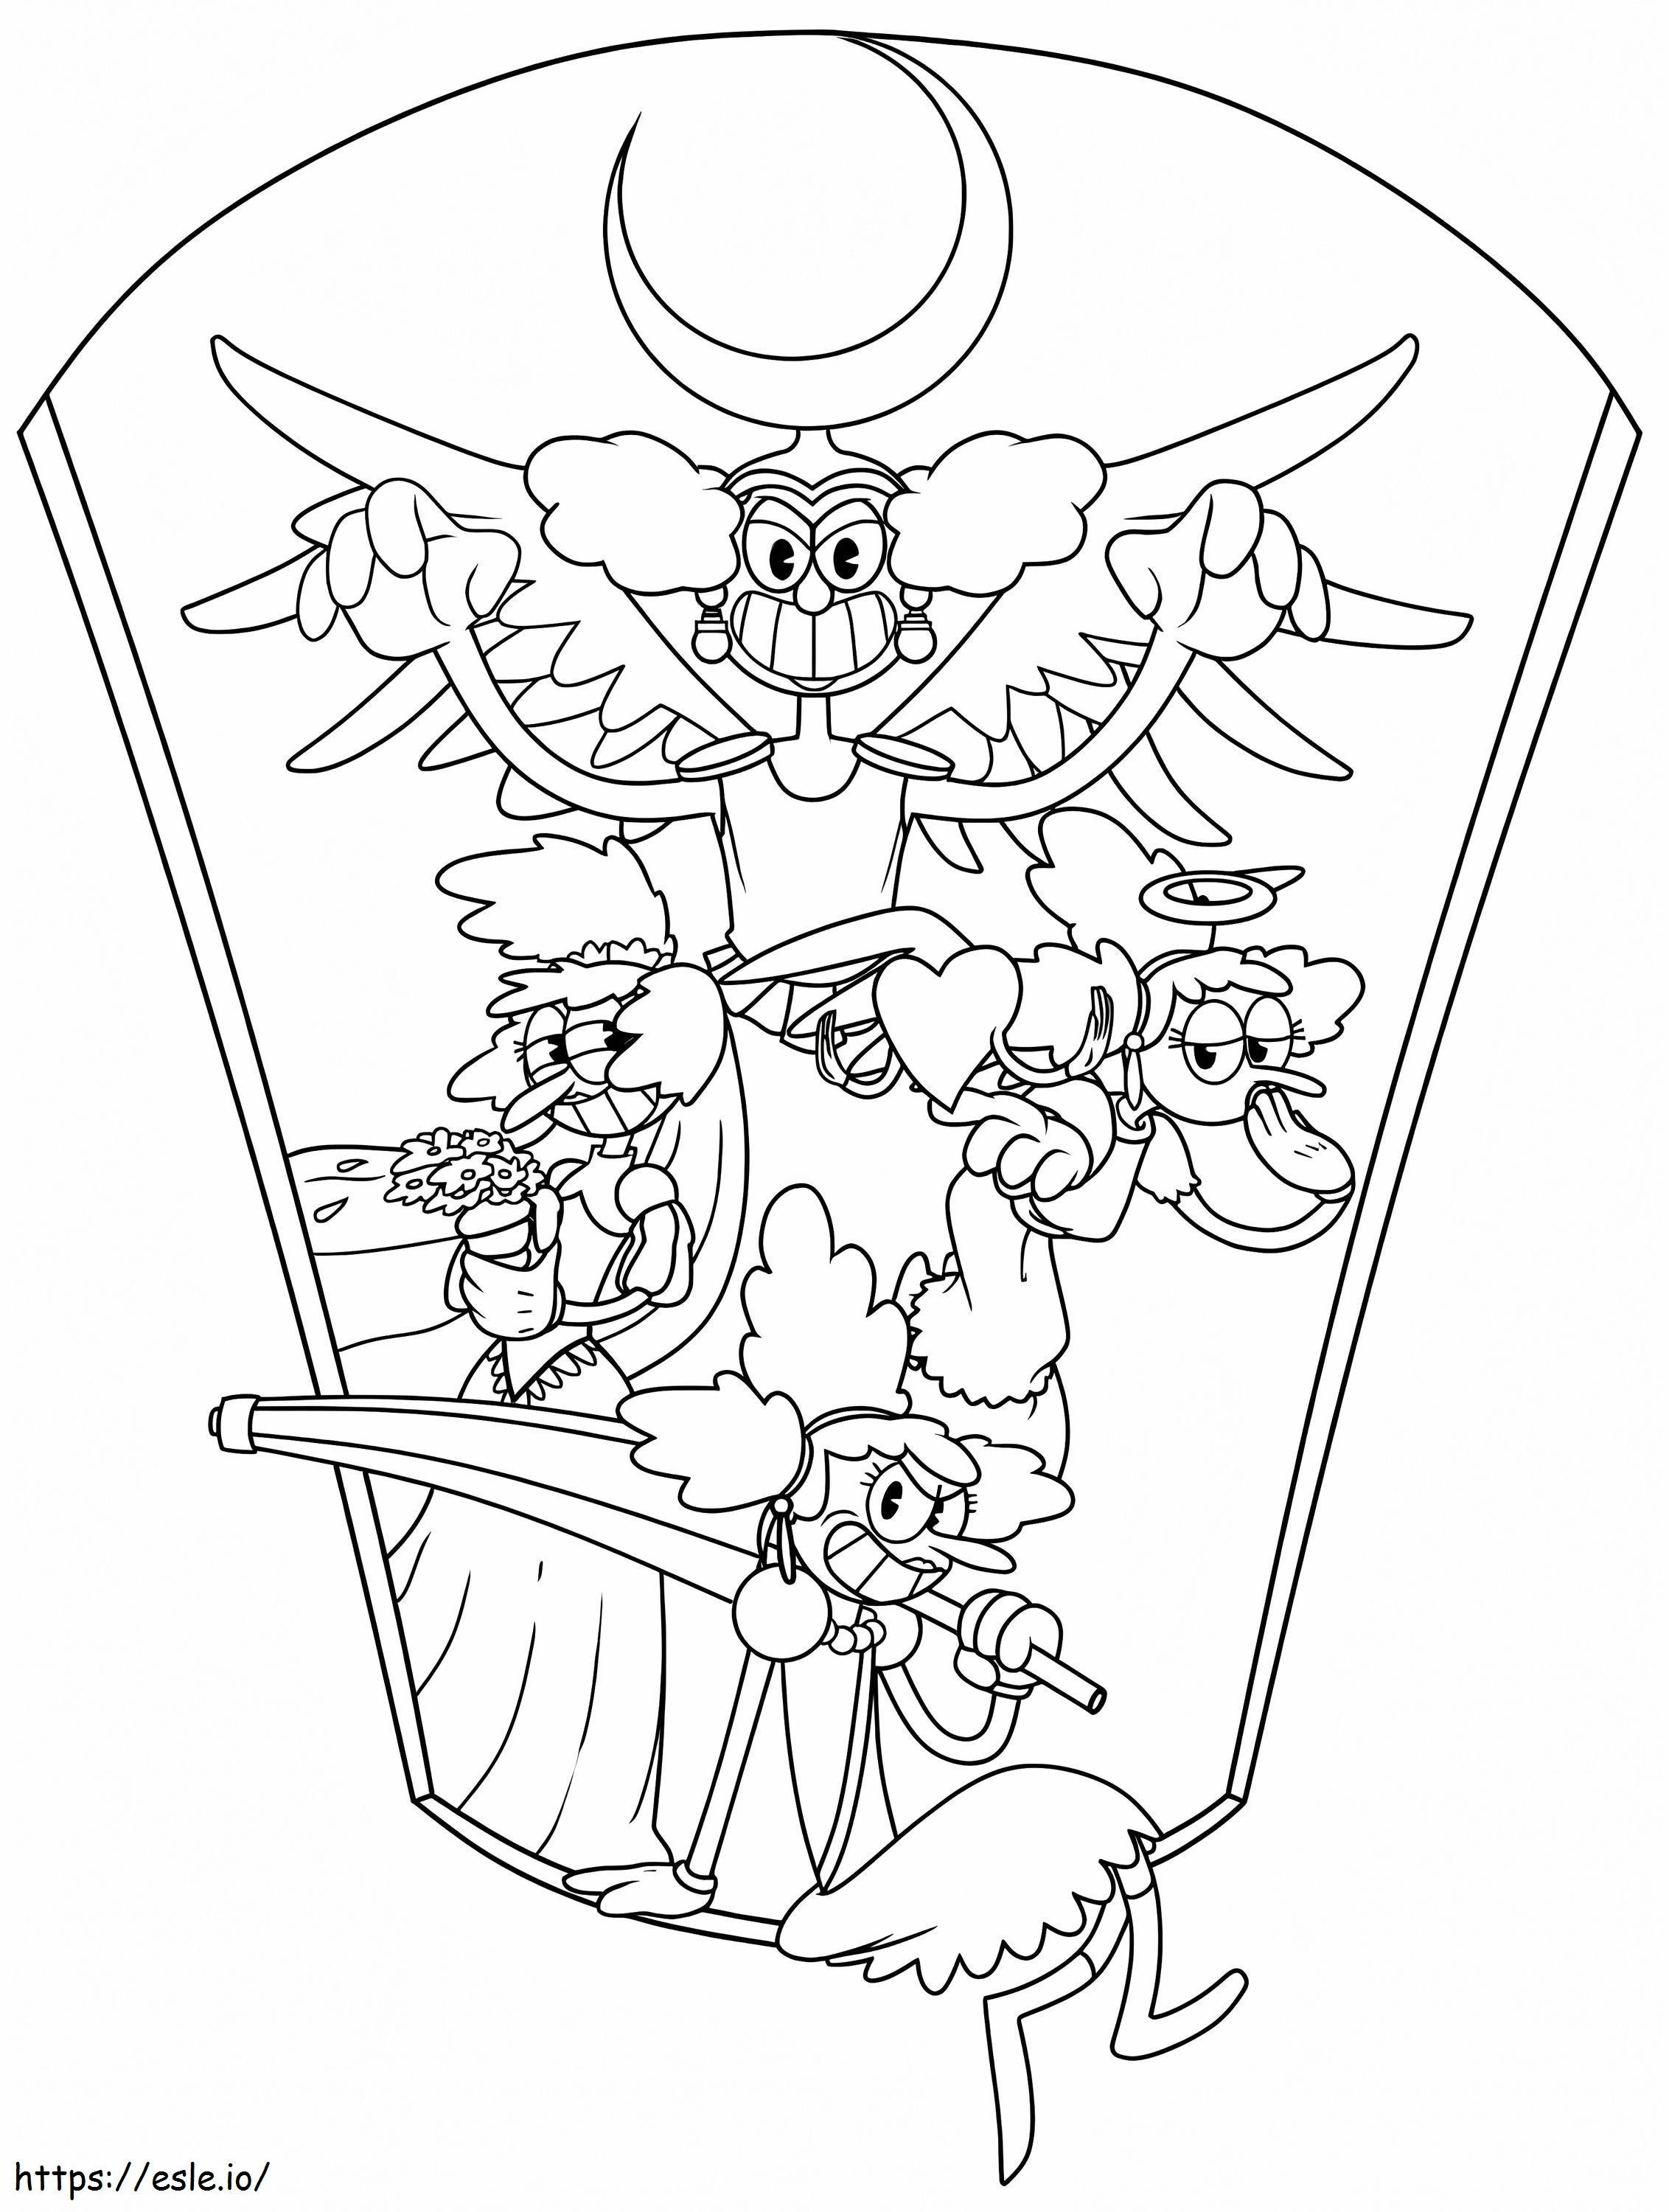 Cuphead Characters coloring page